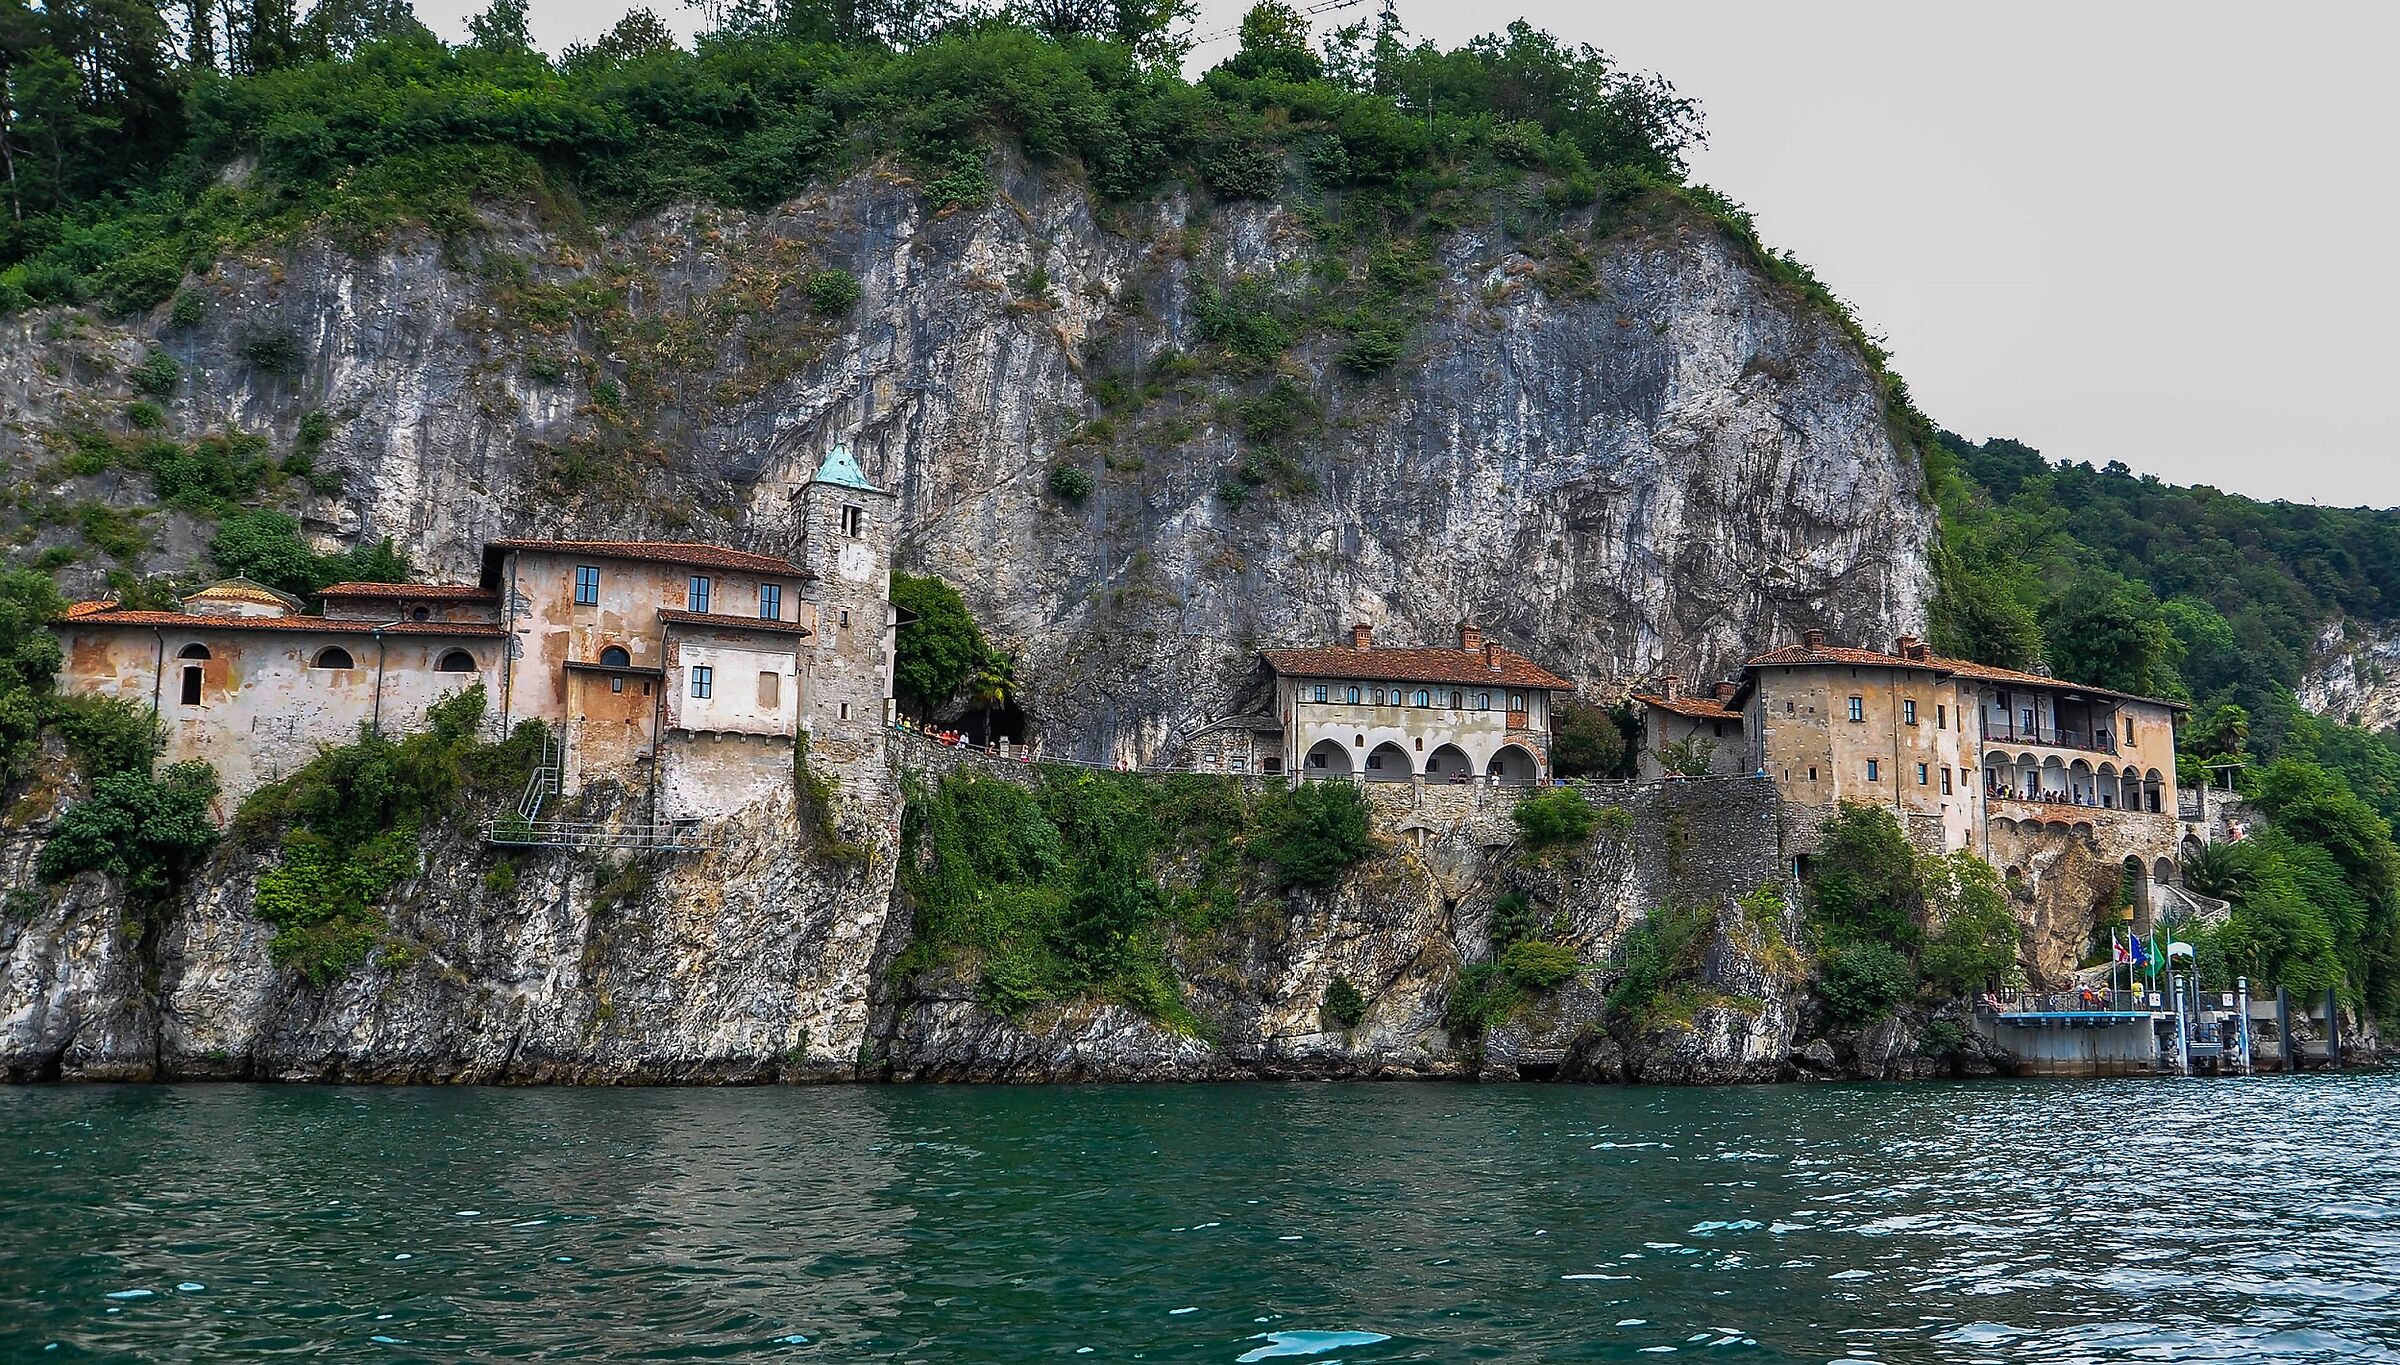 St. Catherine of the stone as seen from the lake...